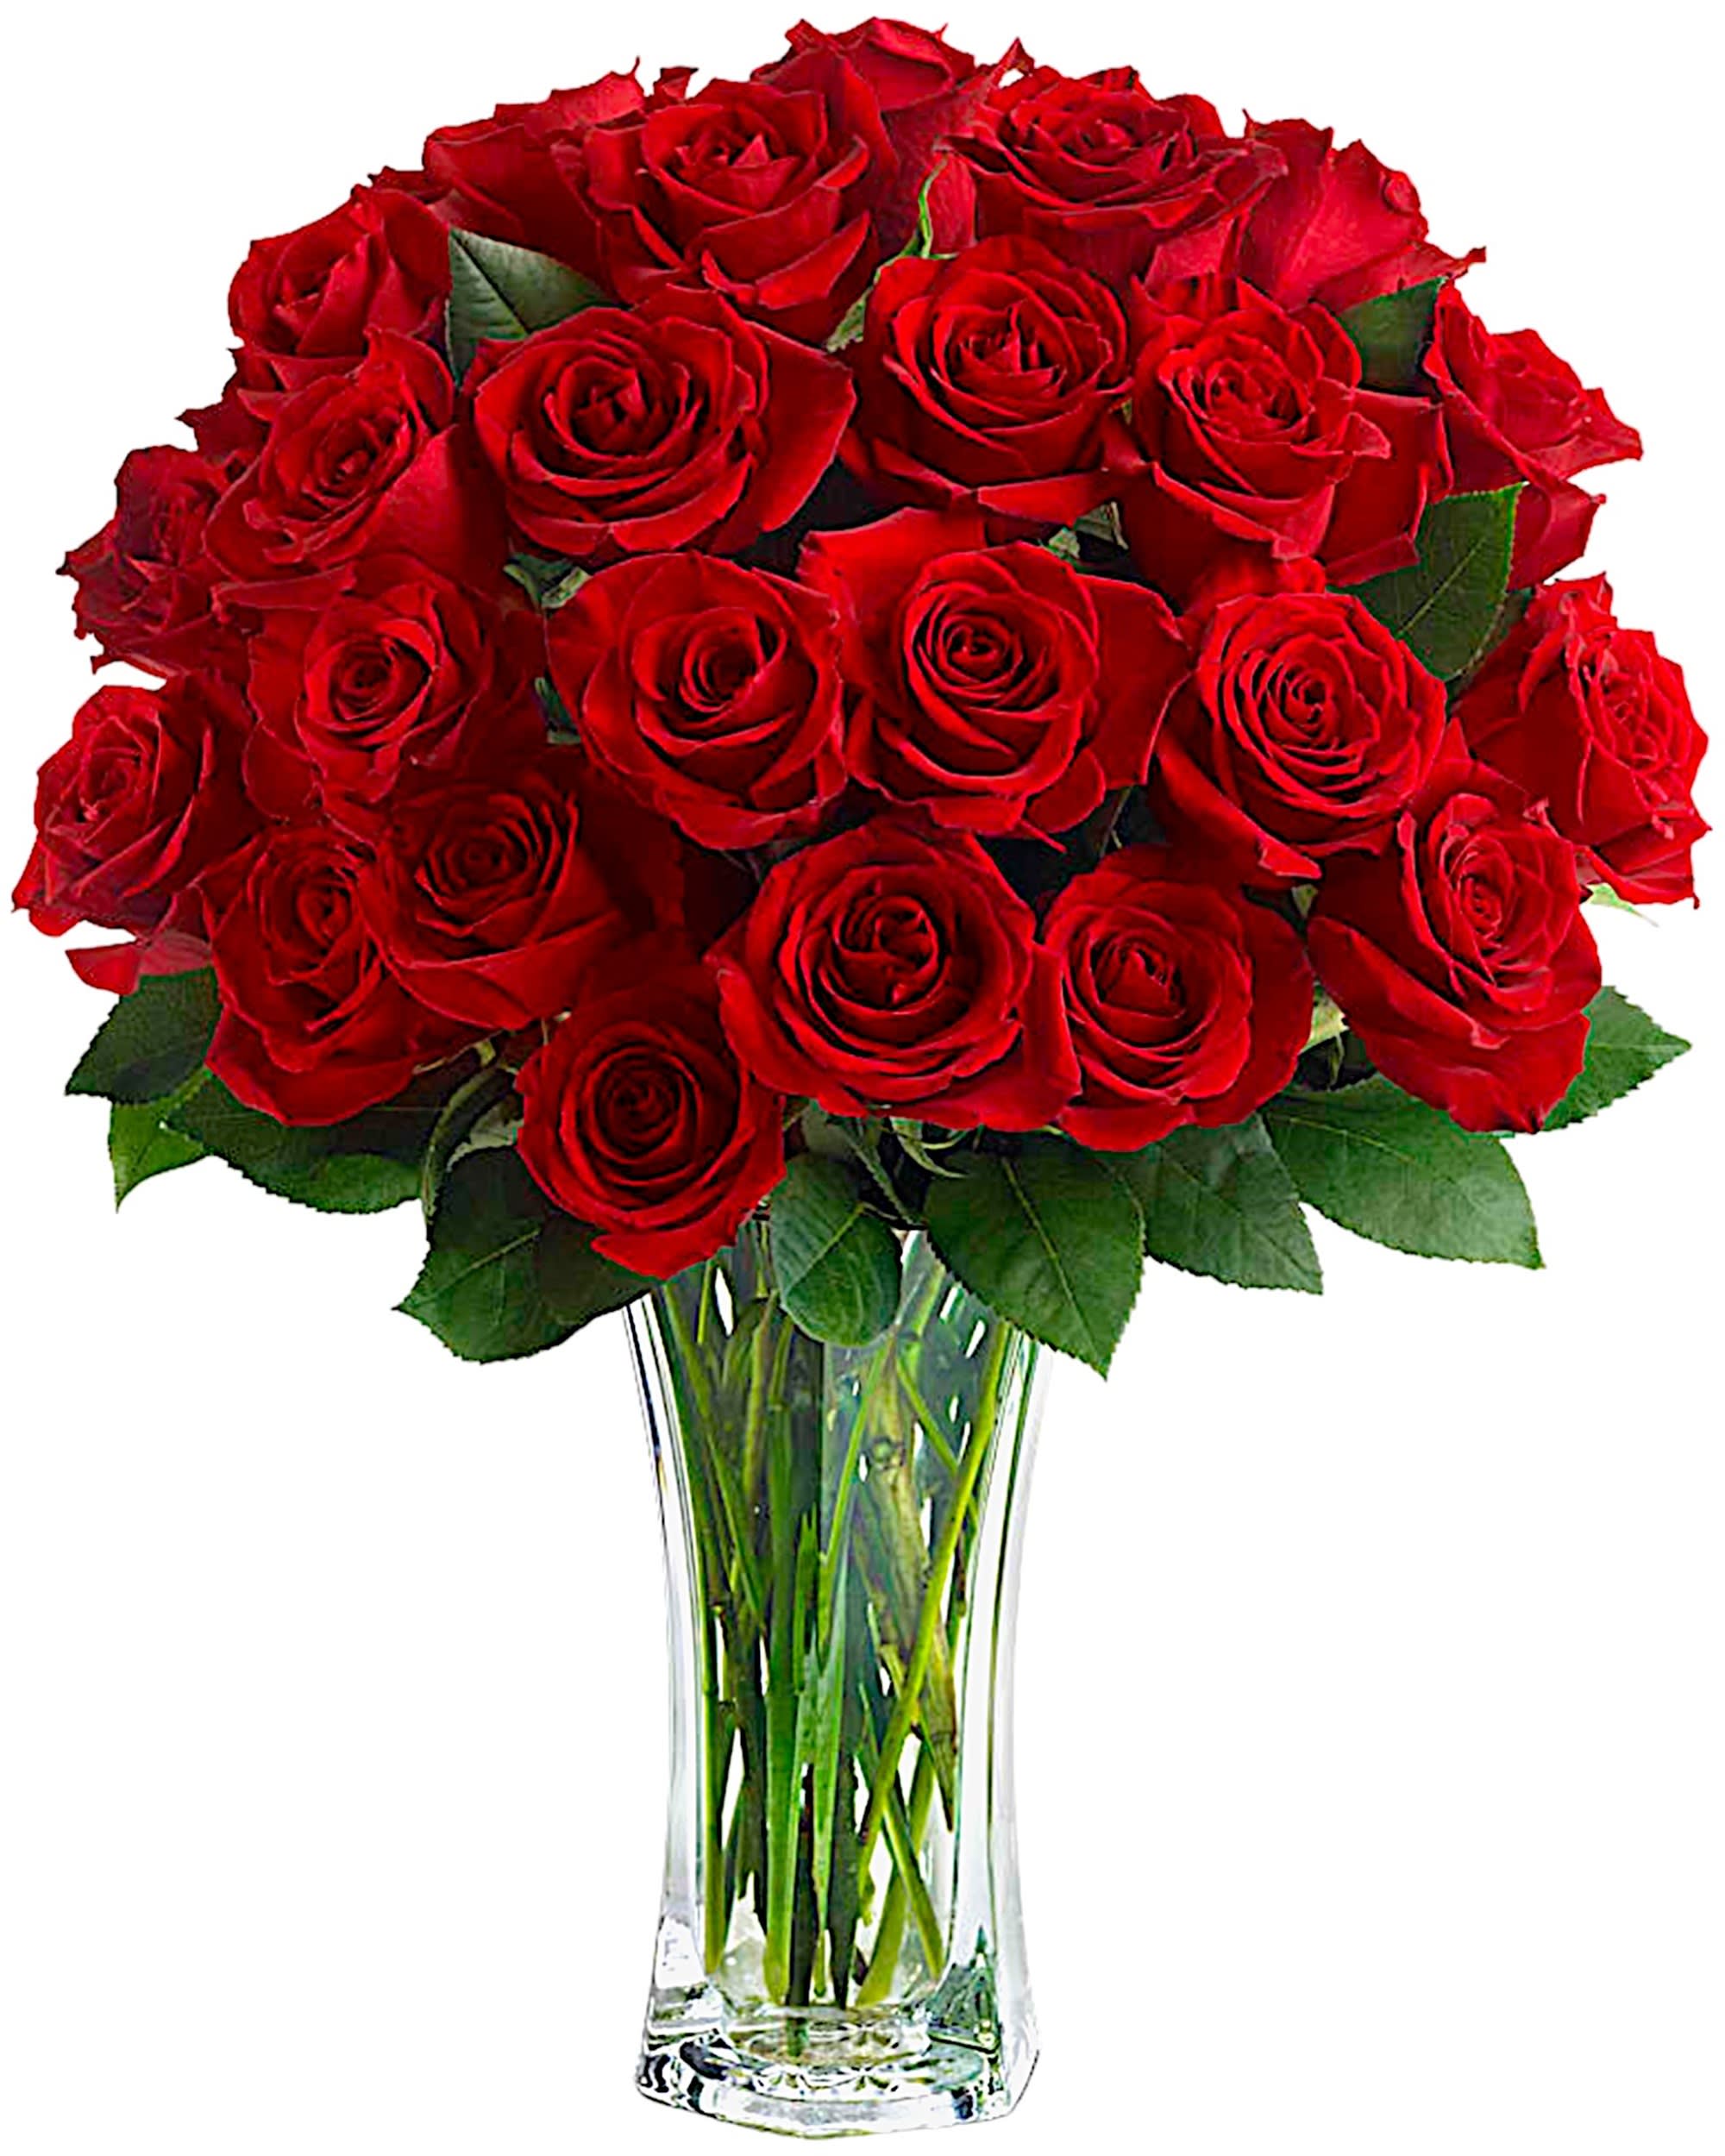 Love and Devotion - Shout your love from the rooftops with beautiful red roses artistically arranged in a gracefully flared clear glass vase. Whether for an anniversary, Valentine's Day, birthday or just because, this gorgeous romantic arrangement of red roses will win their heart all over again.  The dramatic bouquet features red roses accented with salal.  DETAILS VASE INCLUDED Item #NFV-01-1  FLORIST-TO-DOOR  Orientation: All-Around  BLOOM DETAILS Roses  Greenery  The Standard Arrangement is approximately 22&quot;H x 15&quot;W. (24 ROSES) The Deluxe Arrangement is approximately 24&quot;H x 16&quot;W. (30 ROSES) The Premium Arrangement is approximately 25&quot;H x 16&quot;W. (36 ROSES)  Designed by our award-winning florist designers.  HOW TO CARE FOR YOUR FLOWERS 1. Keep in a location without direct sunlight and away from extreme heat or cold. 2. Replace the water regularly and mix in the flower food packet provided. 3. Trim the stems at an angle every other day. 4. As flowers/foliage wilt, remove &amp; discard  Please Note: The arrangement pictured reflects an original design for this product. While we always do our best to follow the original flower recipe, the exact flower or container is sometimes unavailable. We may replace items of equal or greater value to deliver the freshest flowers possible while keeping the style &amp; color palette. We assure you that we will create a beautiful, fresh flower arrangement with only the best quality flowers to keep you as a loyal customer.  How to place an order? We have several options. 1. You can place an order directly on this secure website... OR 2. You can call in your order by dialing: (323) 262 - 9238... OR 3. You can visit our store (appointment recommended 323.262.9238)  NINFA'S FLOWERS 2405 WHITTIER BLVD. LOS ANGELES, CA. 90023  ATTENTION: *Please note that on busy holidays, Valentine's Day, and Mother's Day, we cannot verify if the recipient received the flowers until the following day because our drivers don't turn in their signature delivery tablets until the following day. You can verify delivery on the website after 10:00 pm, call 323.262.9238 the following day after 10:00 am, or contact the recipient directly if you haven't received a call from them. Thank you for your patience and understanding.